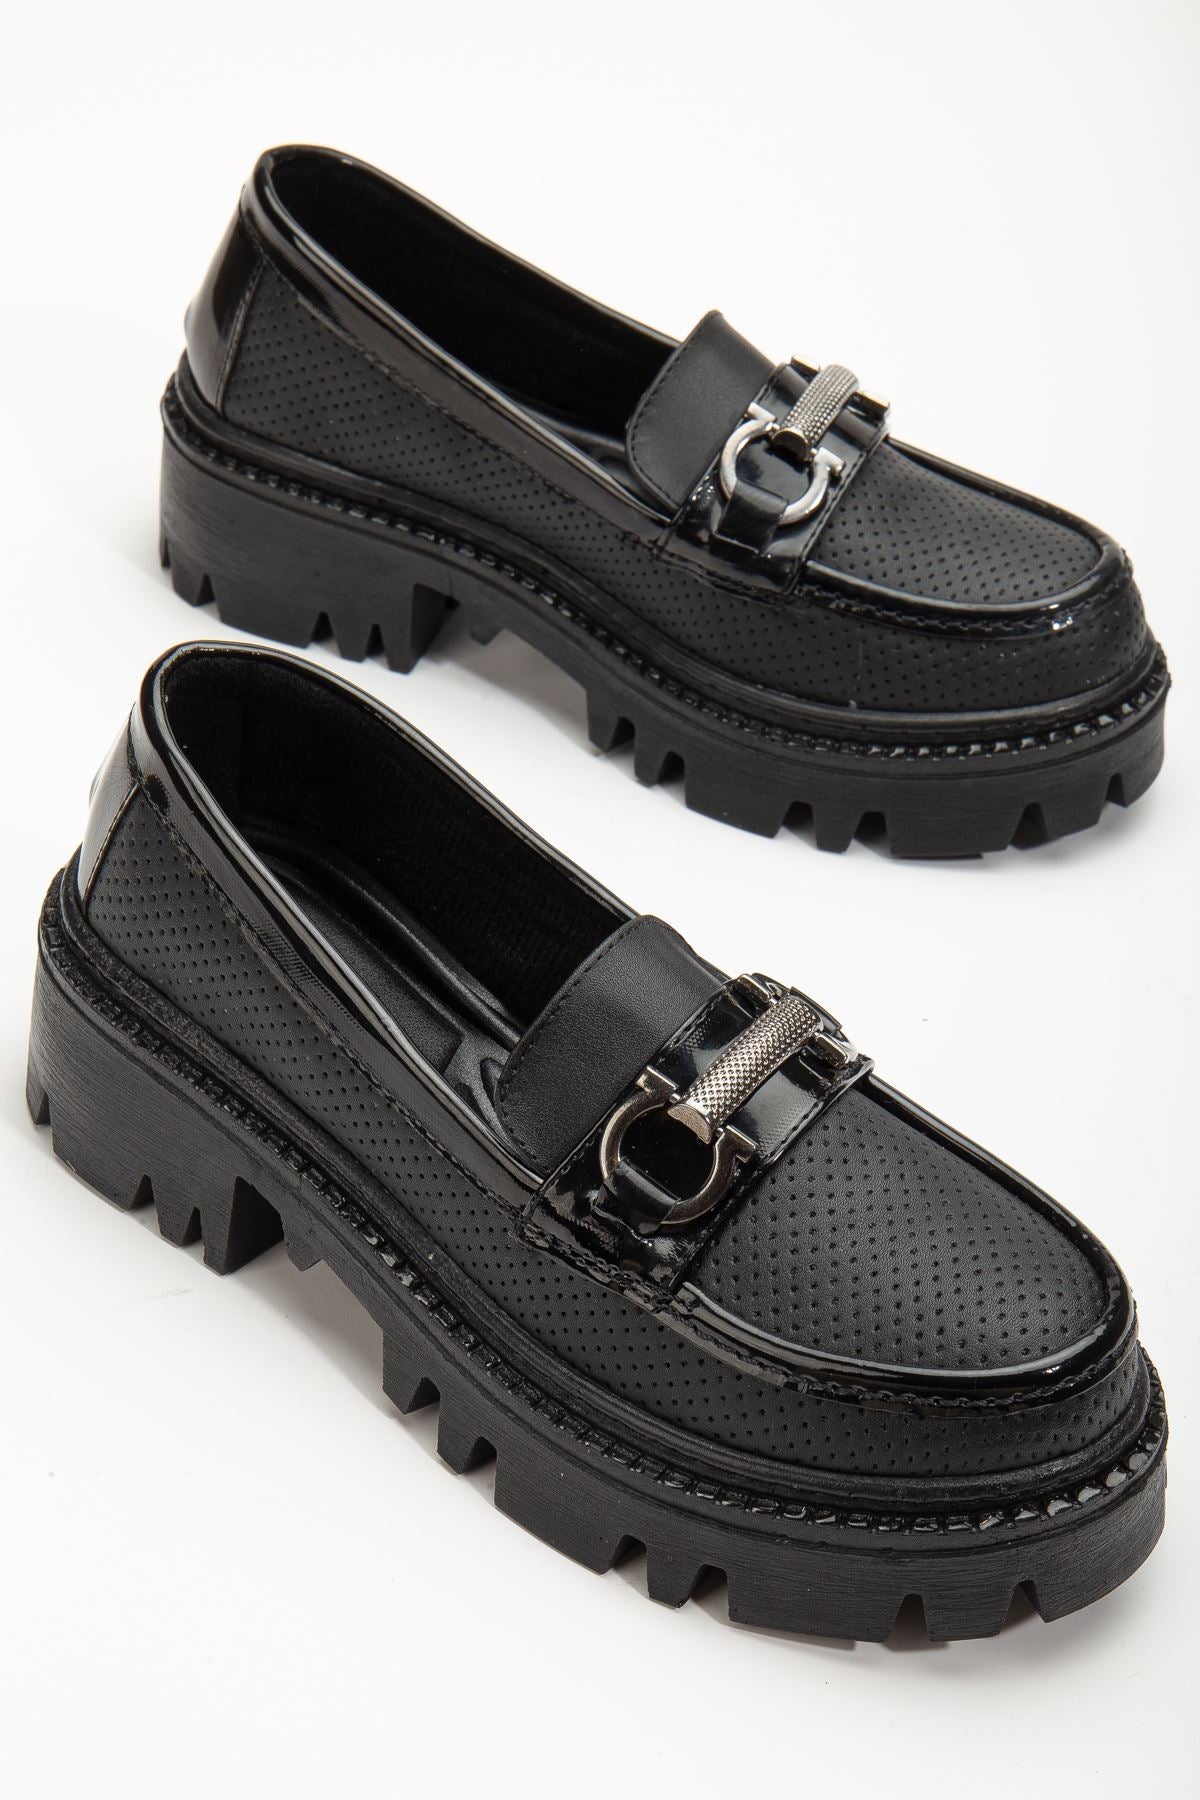 Women's Black Buckle Detailed Oxford Shoes - STREETMODE™